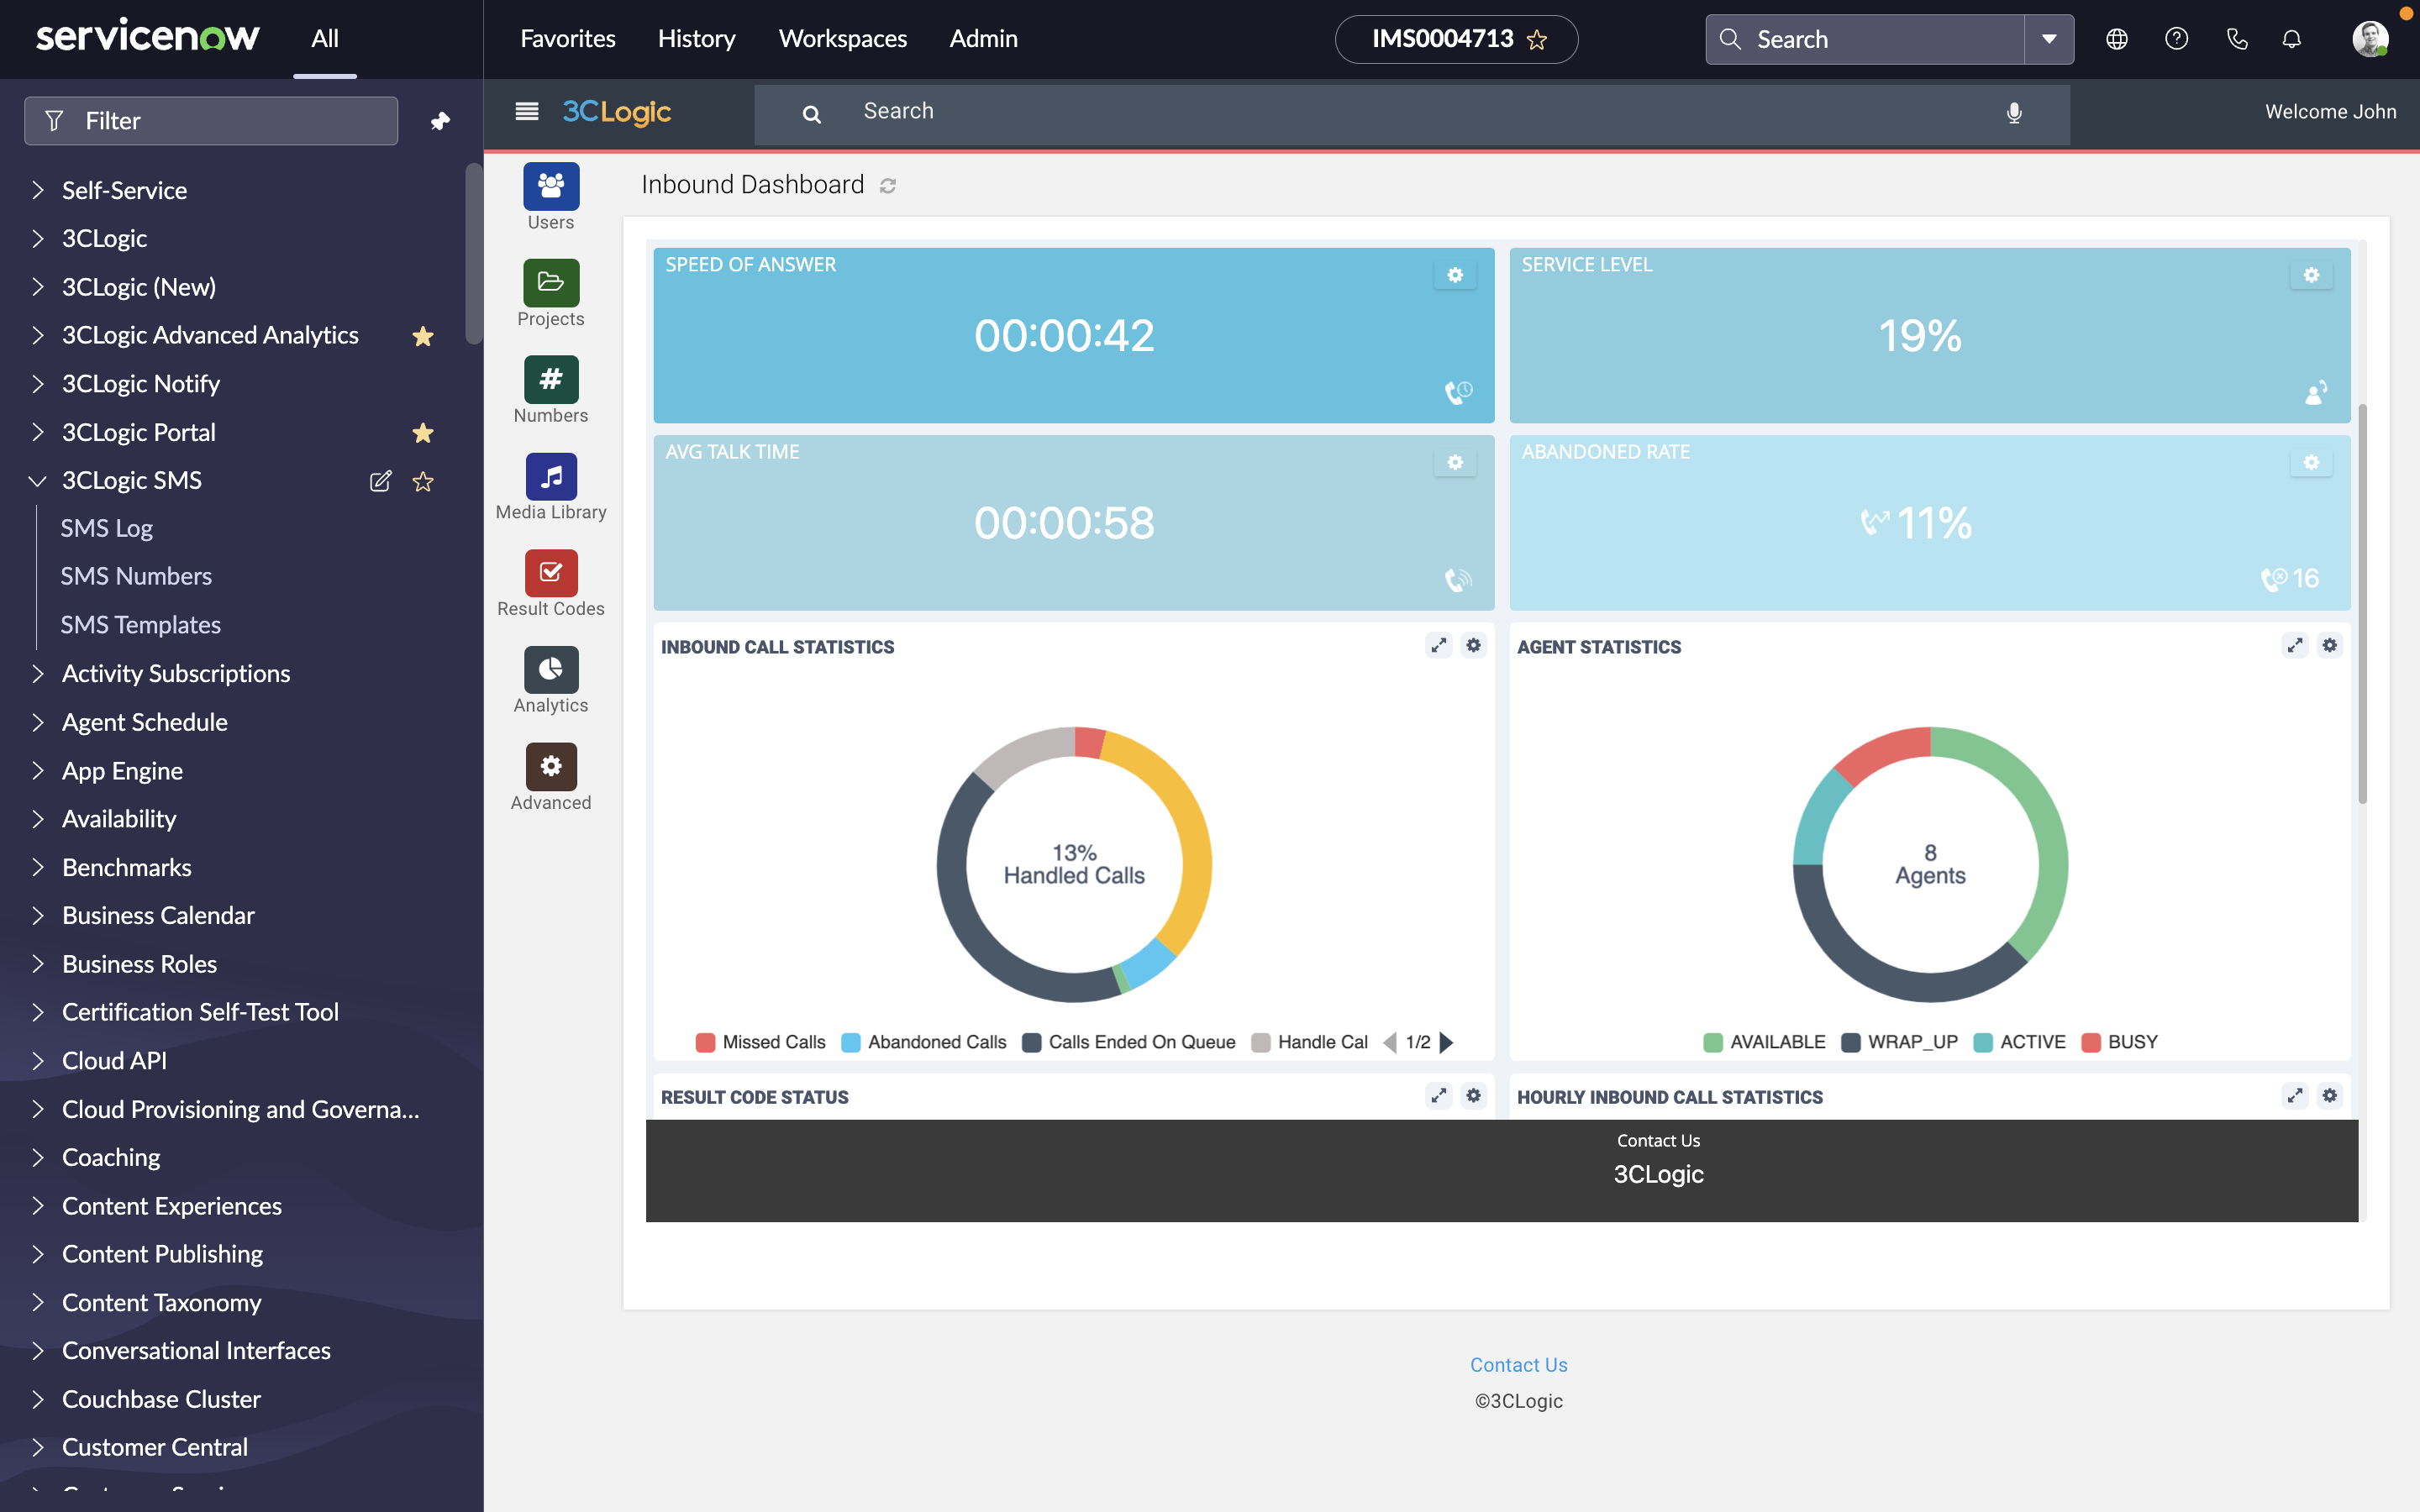 3clogic-servicenow-it-service-management-contact-center-dashboard-7